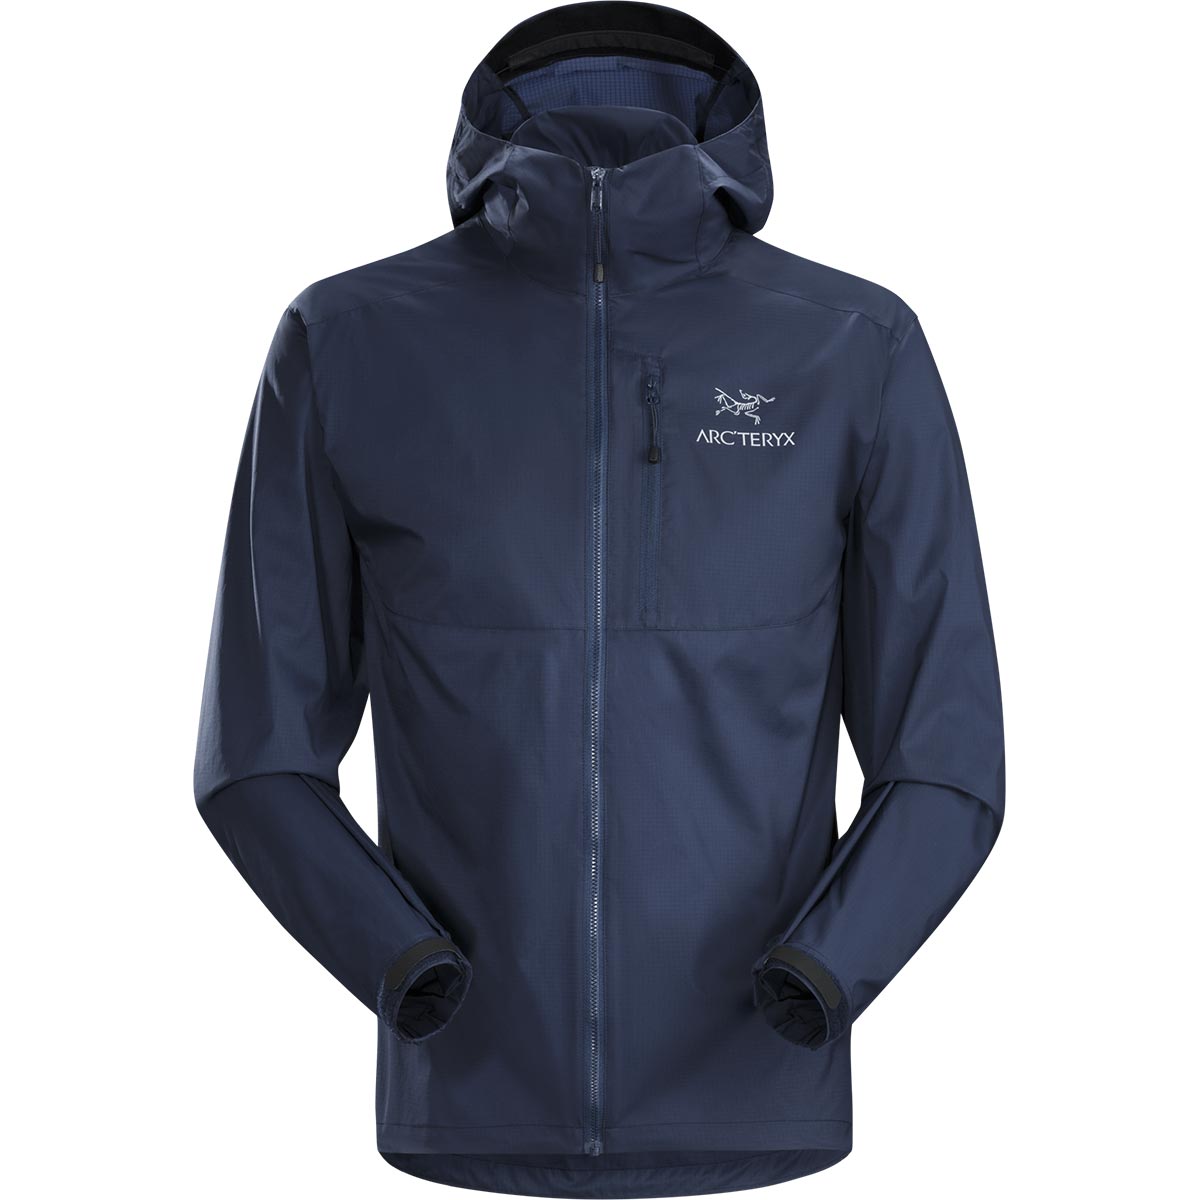 Squamish Hoody, men's, discontinued Fall 2018 colors